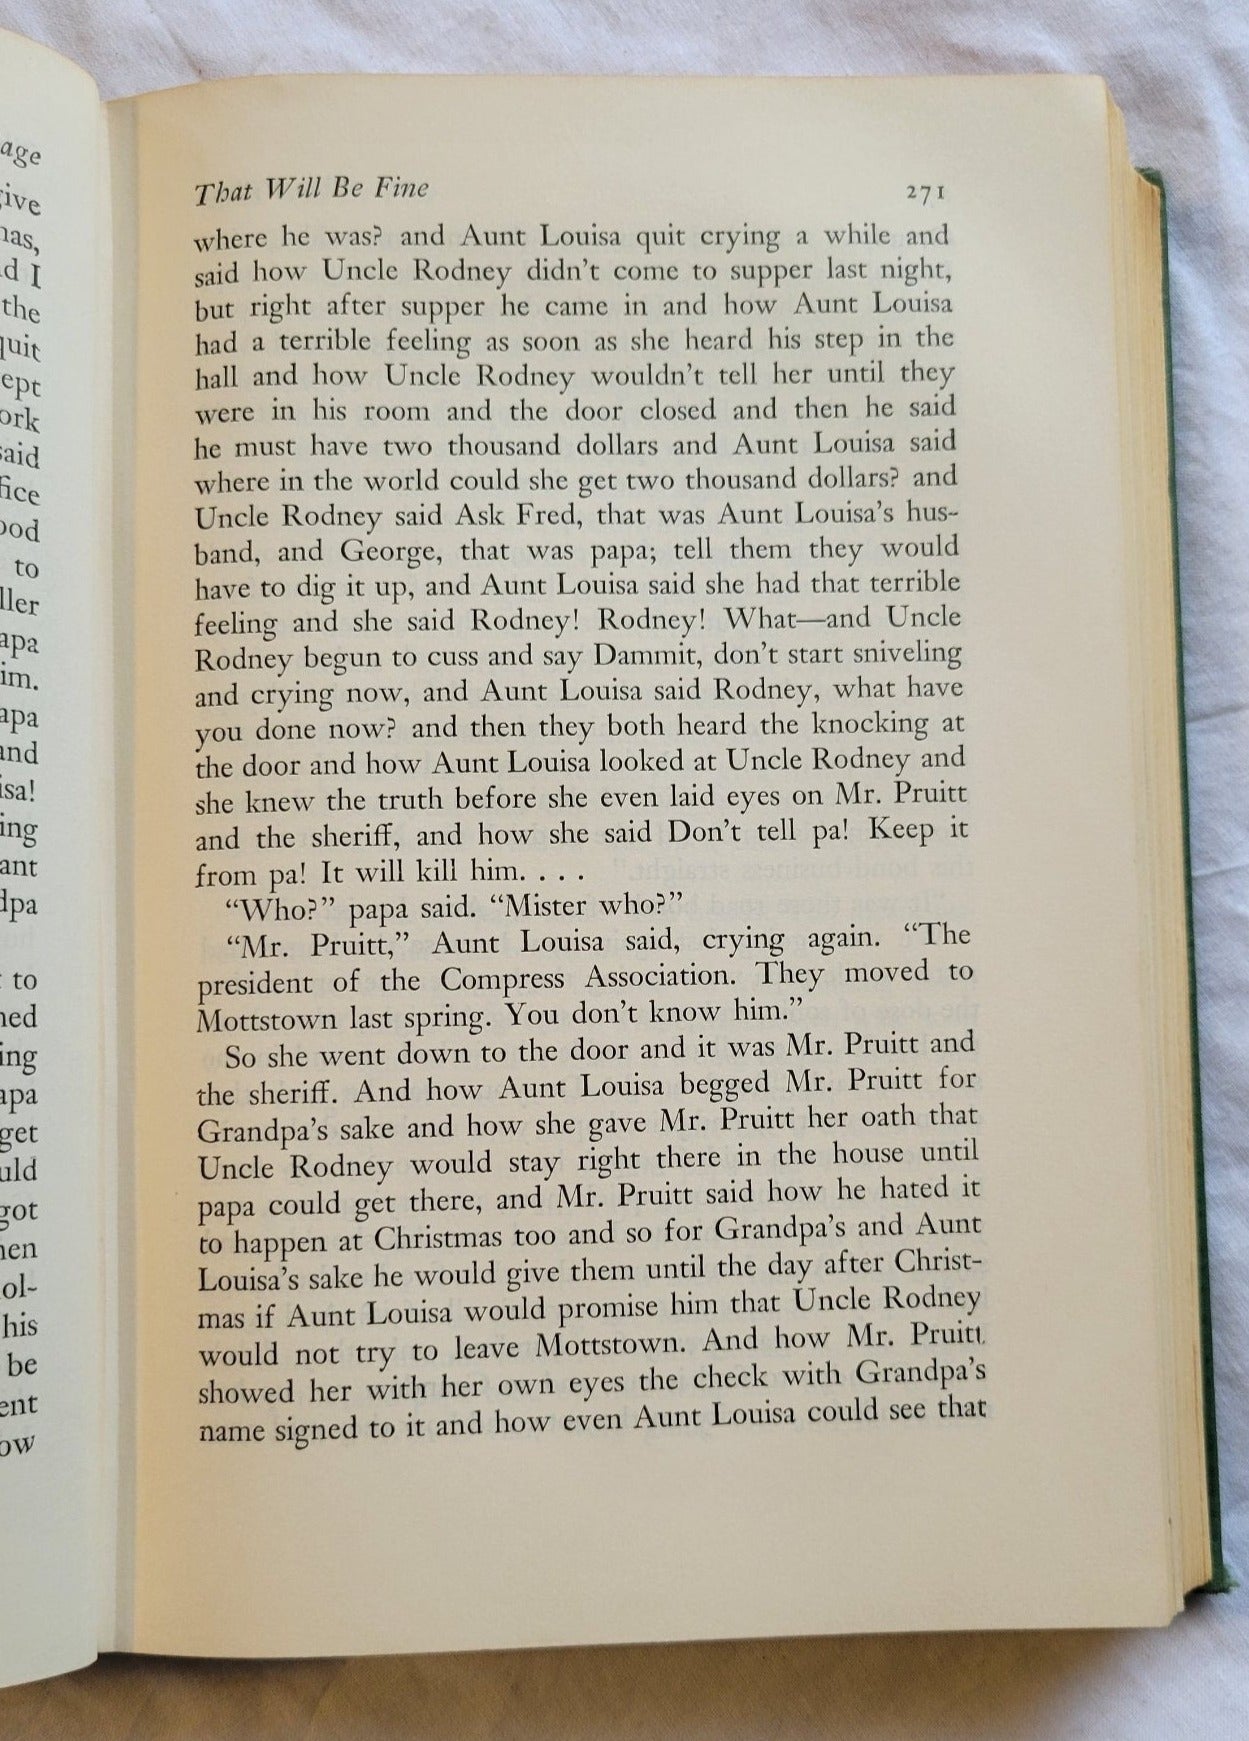 Vintage book. "Collected Stories" by William Faulkner, published by Random House. View of page 271